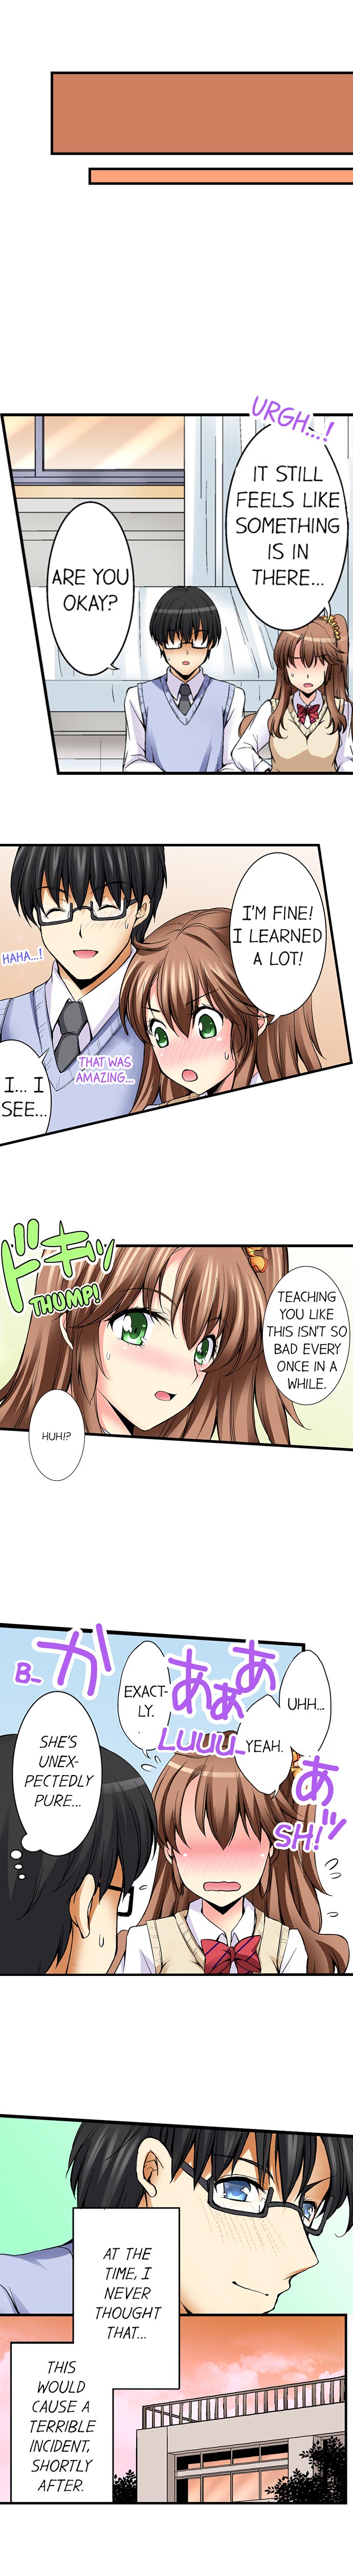 Why Can't i Have Sex With My Teacher? - Chapter 9 Page 9